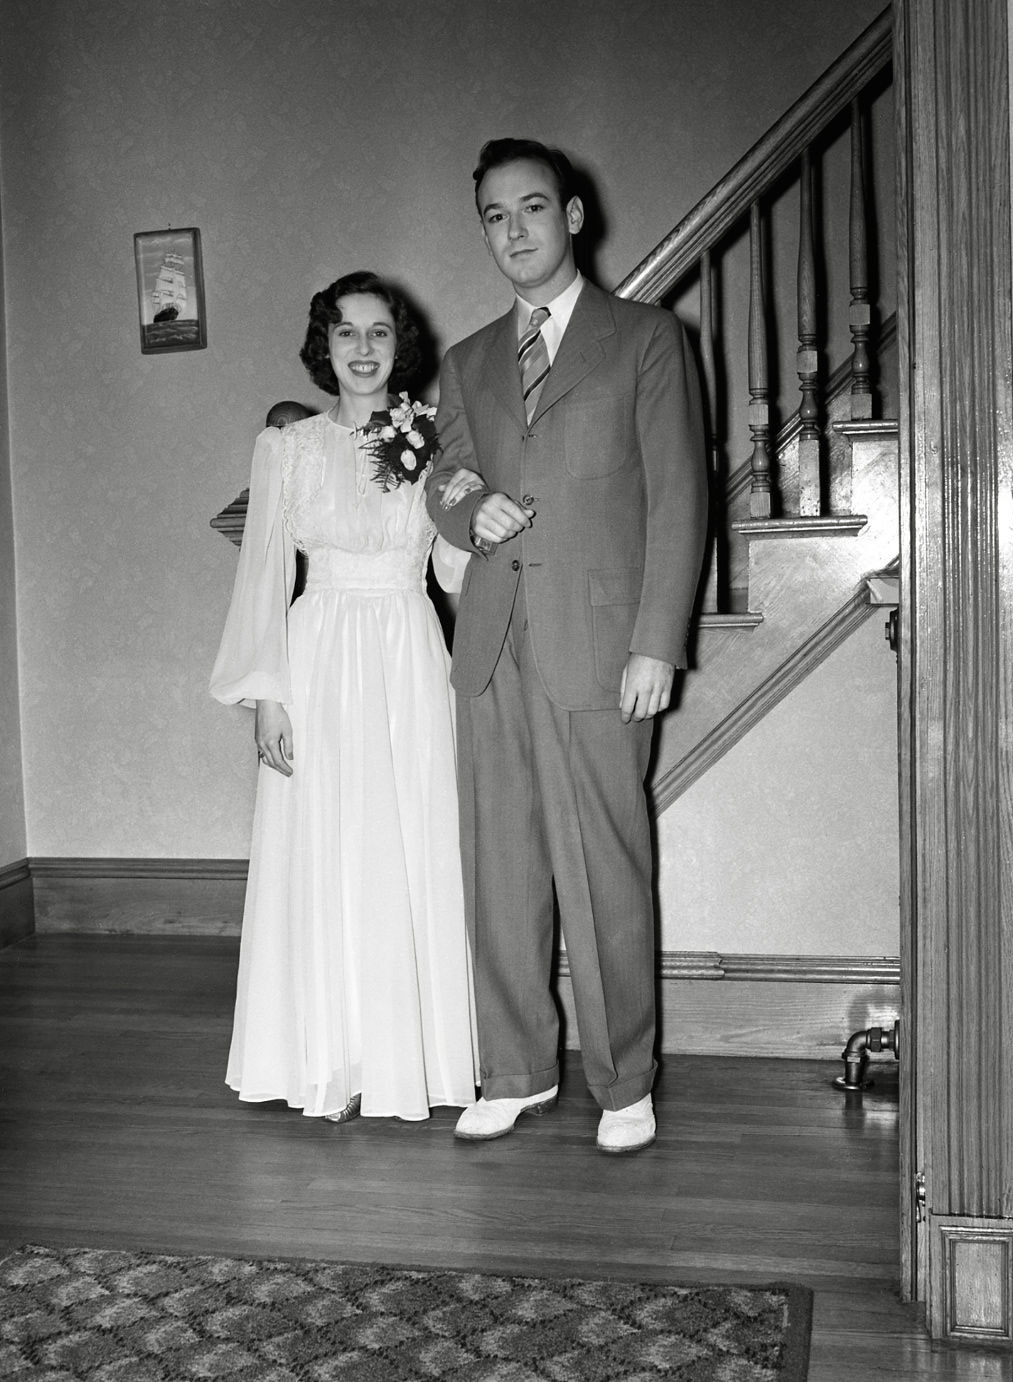 Young couple going to a prom or other important social event. She is excited, he, well who knows what he is thinking. From my negatives collection. View full size.